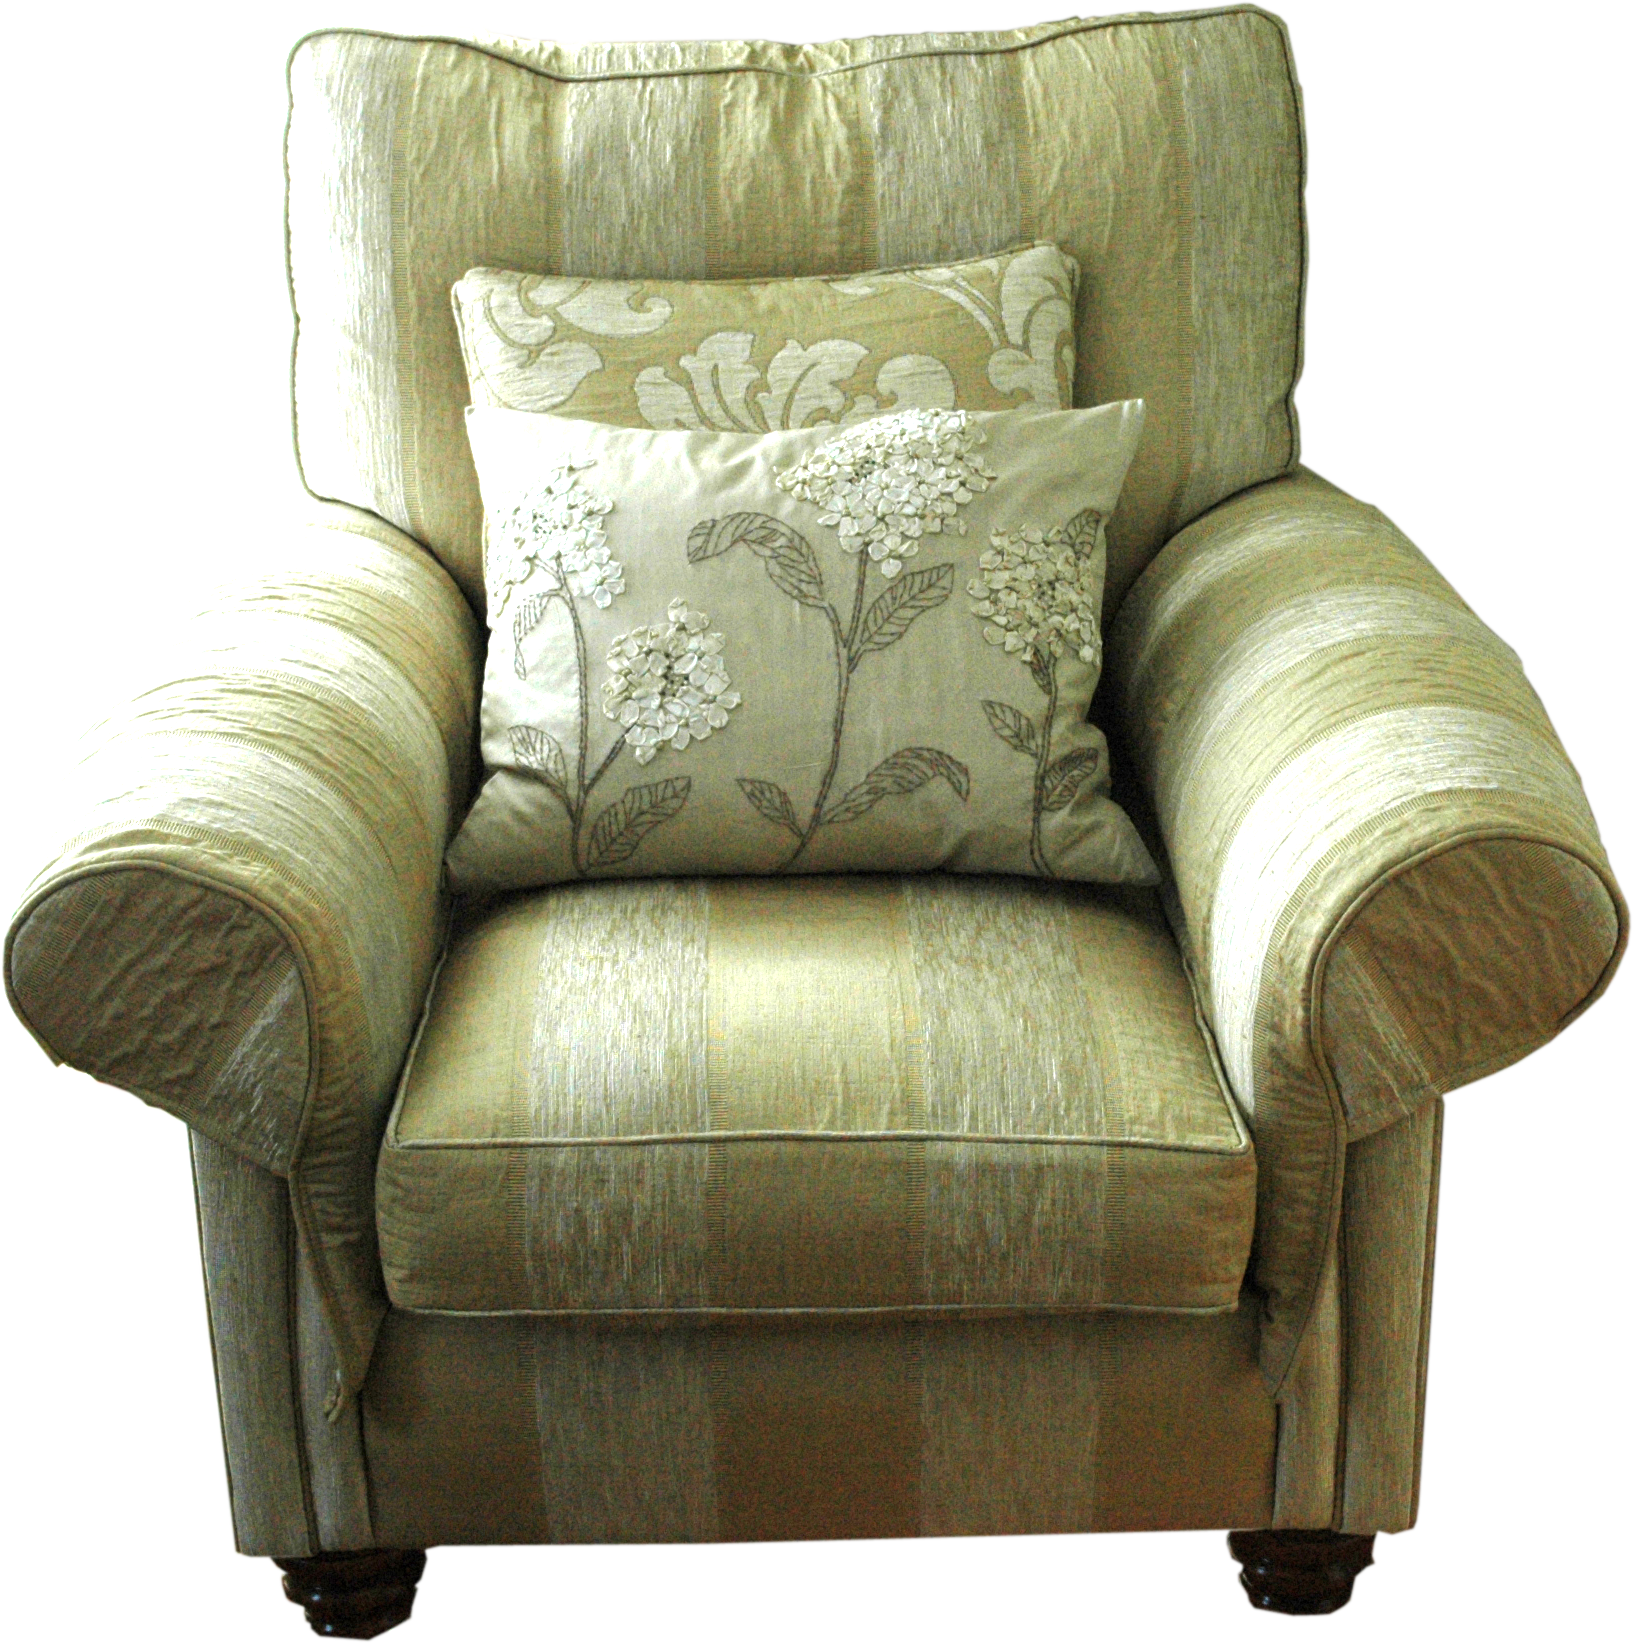 Armchair PNG image